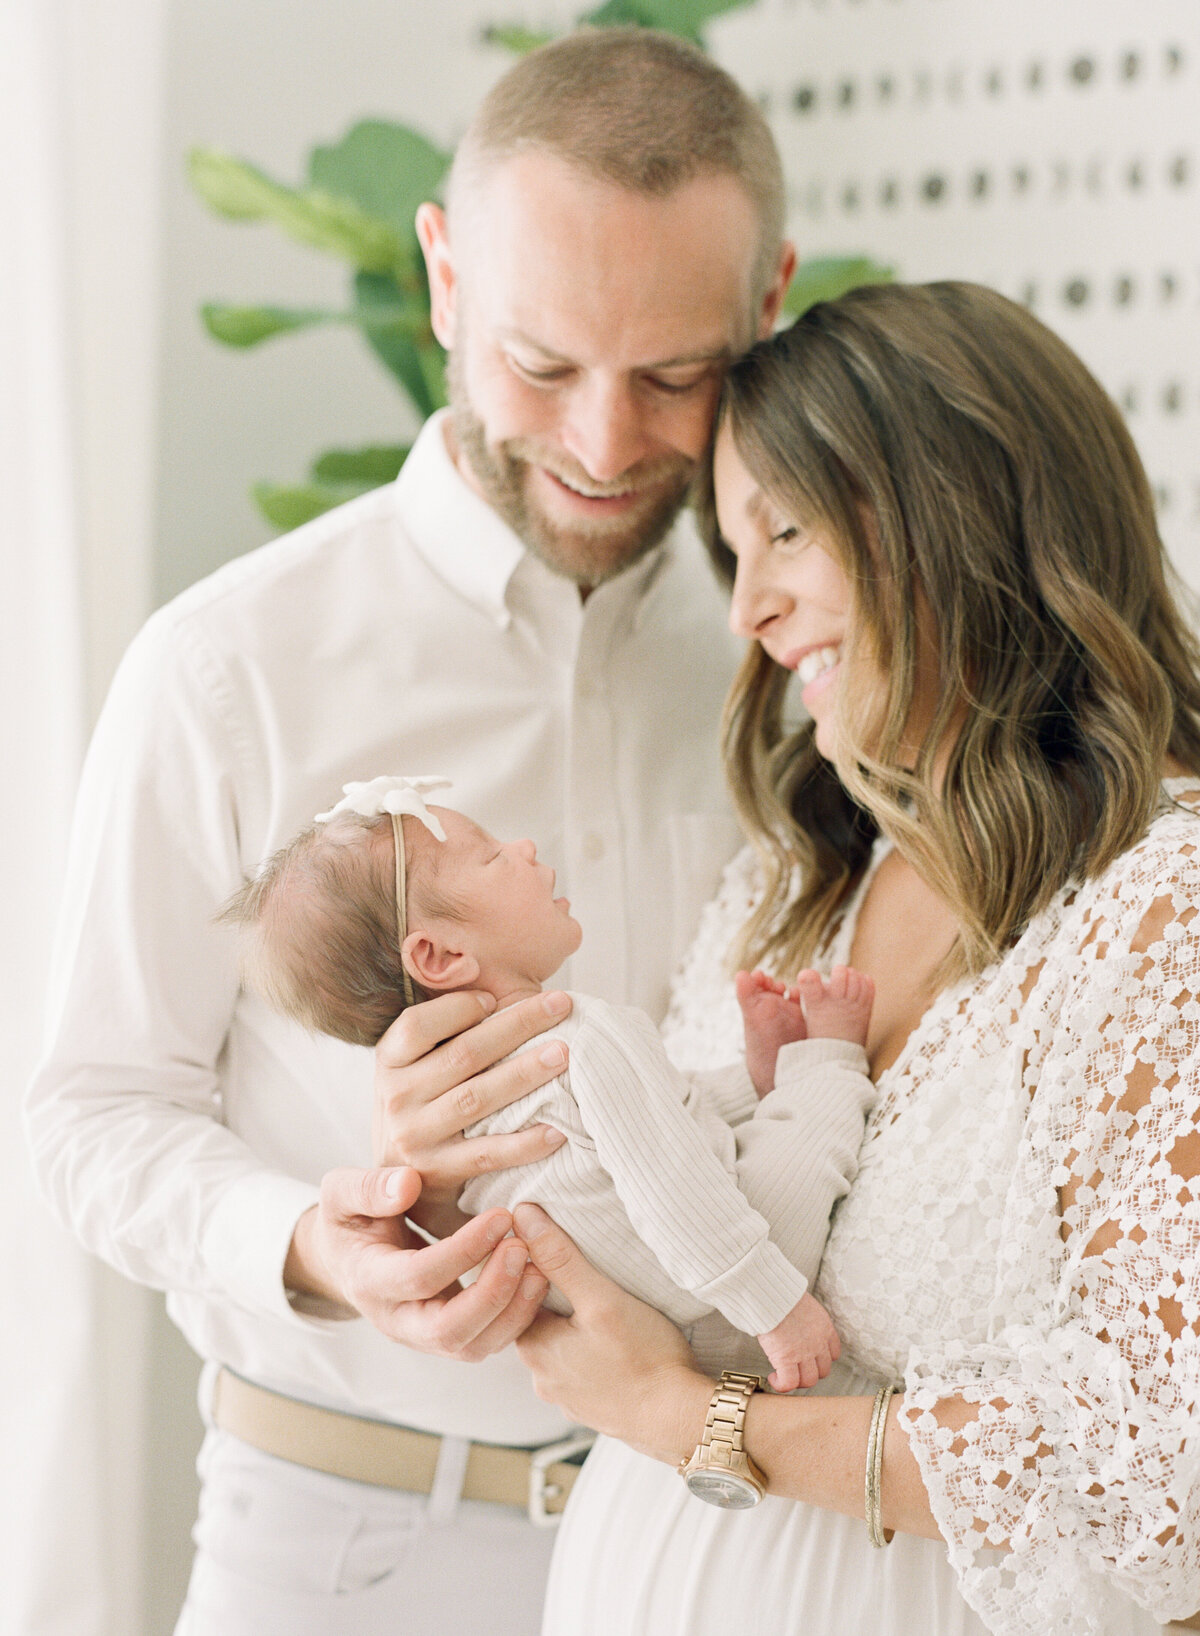 Parents hold and admire their newborn daughter during their Raleigh newborn photography session. Photographed by Raleigh Newborn Photographer A.J. Dunlap Photography.